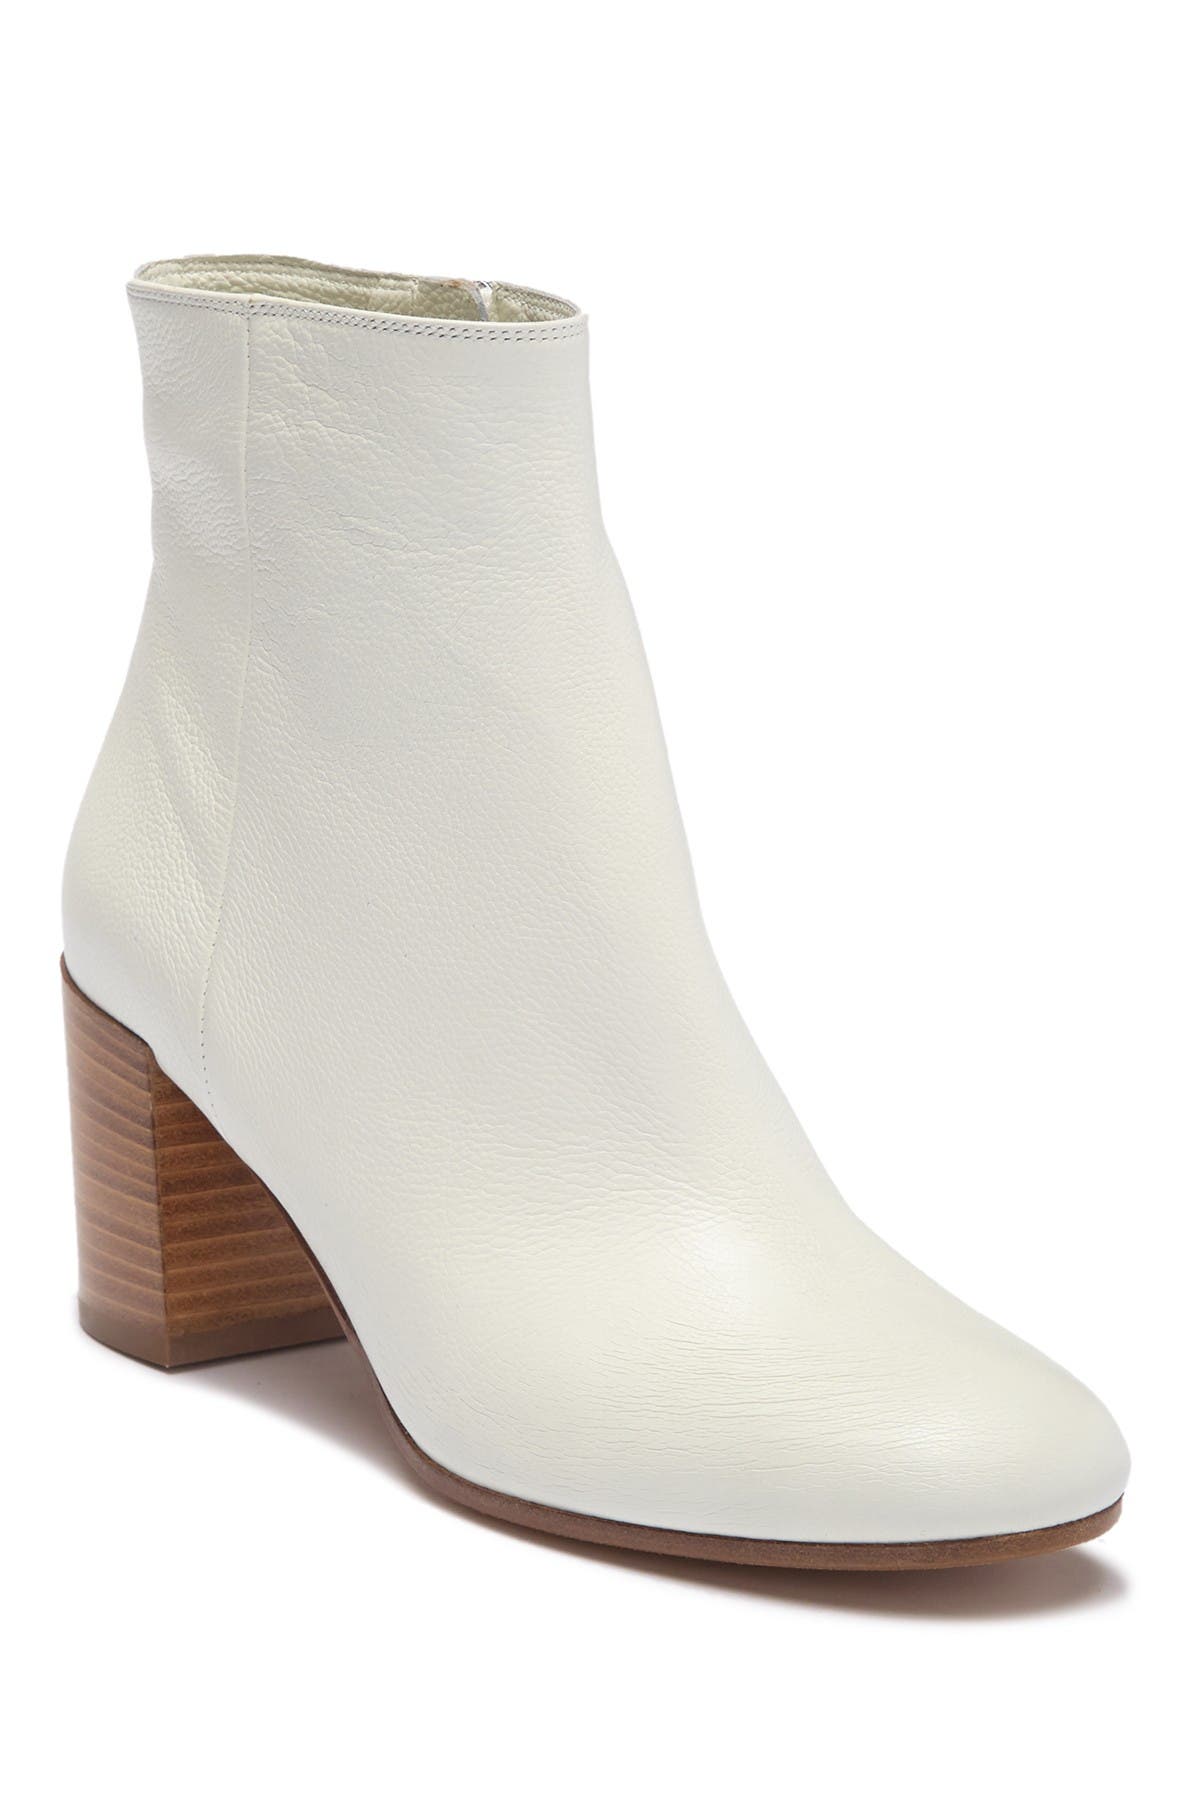 vince blakely bootie